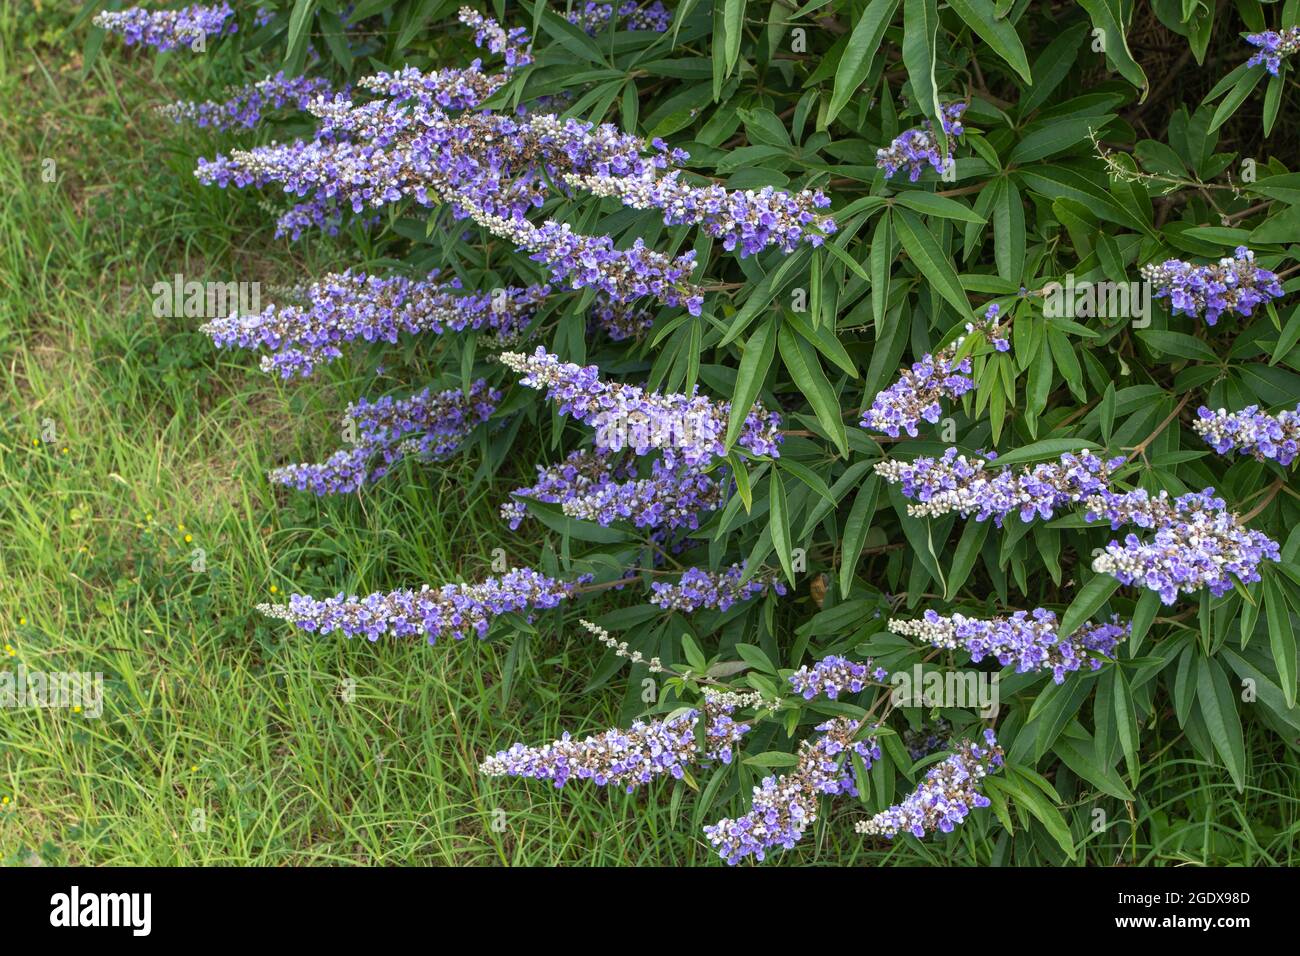 Chaste tree. Vitex plant with spikes of lavender butterfly-attracting flowers. Stock Photo